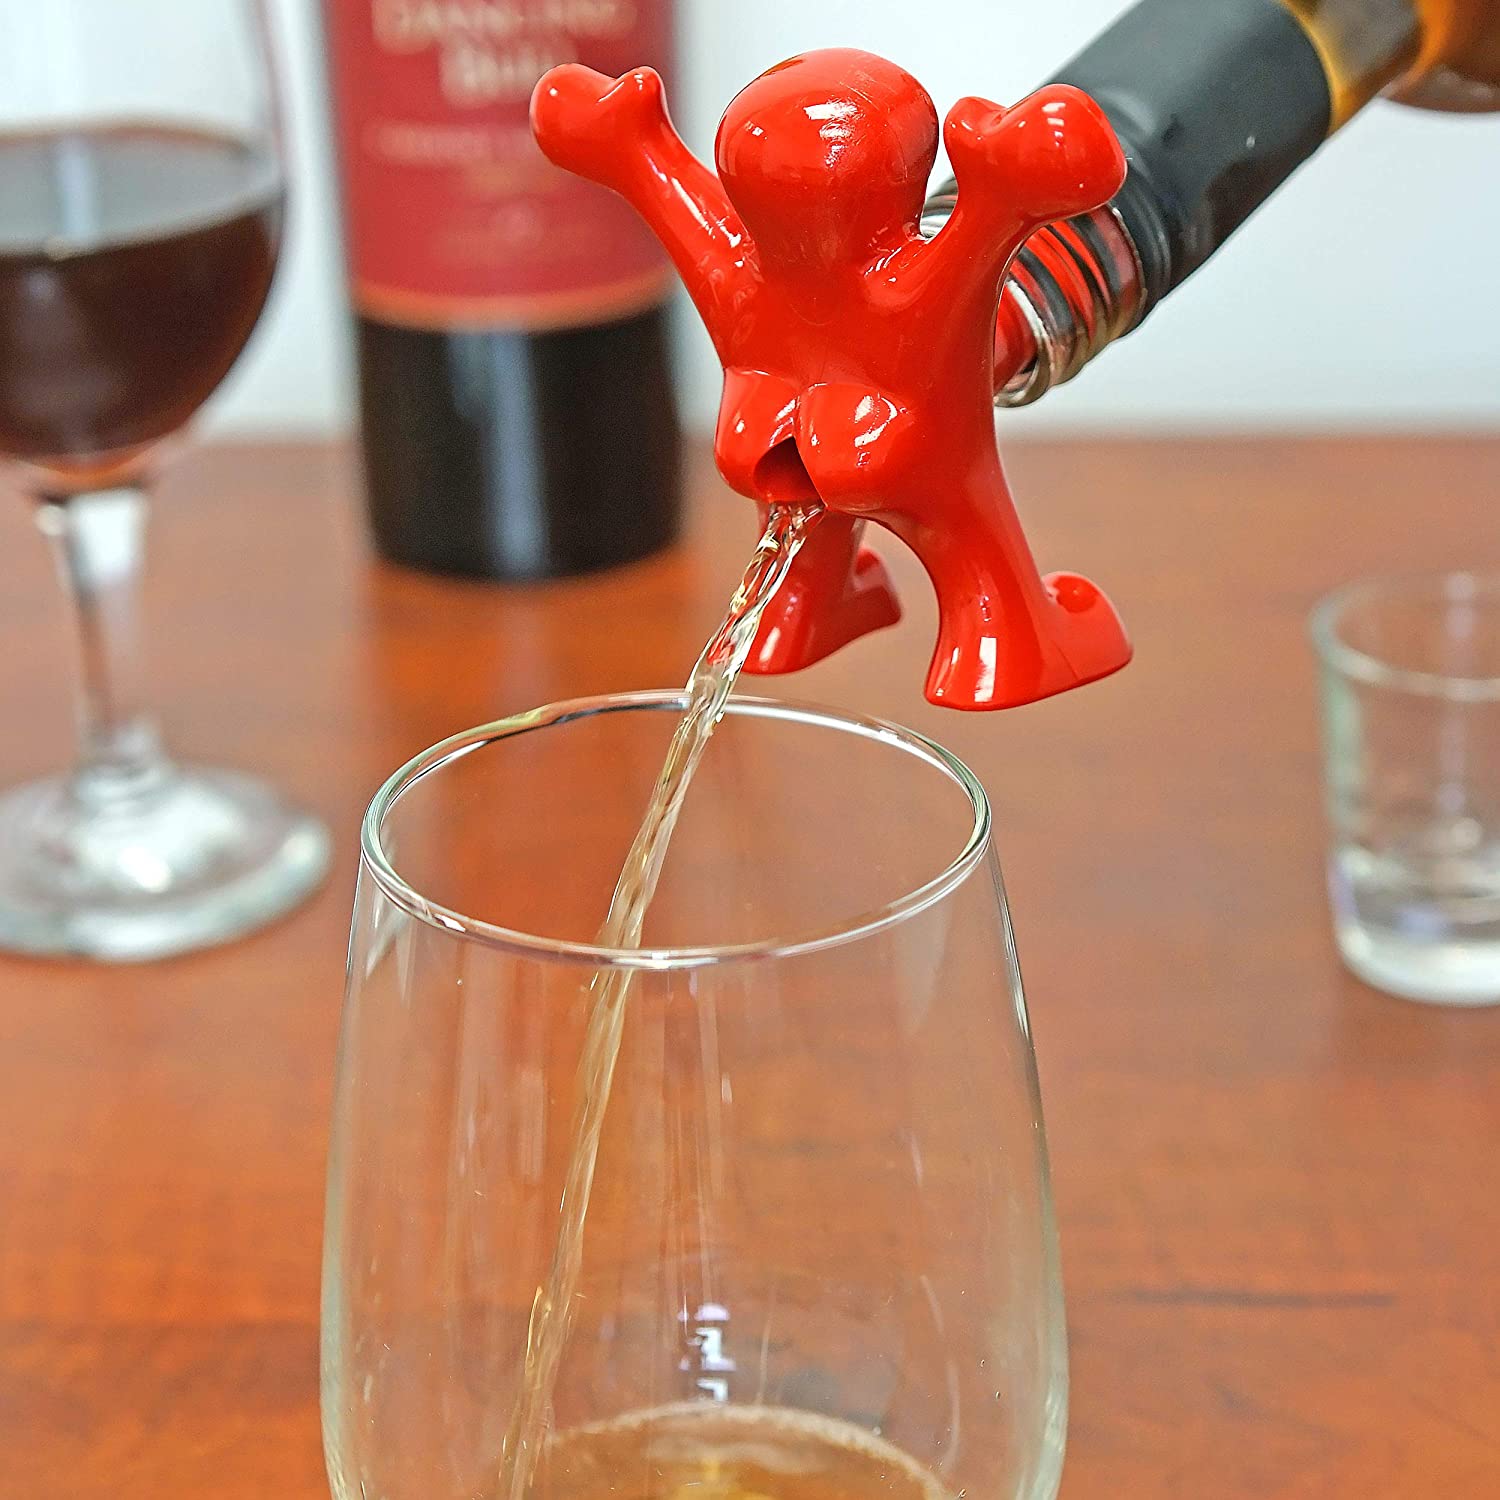 Sir Perky Novelty Wine Pourer- Funny Inappropriate wine bottle pourer